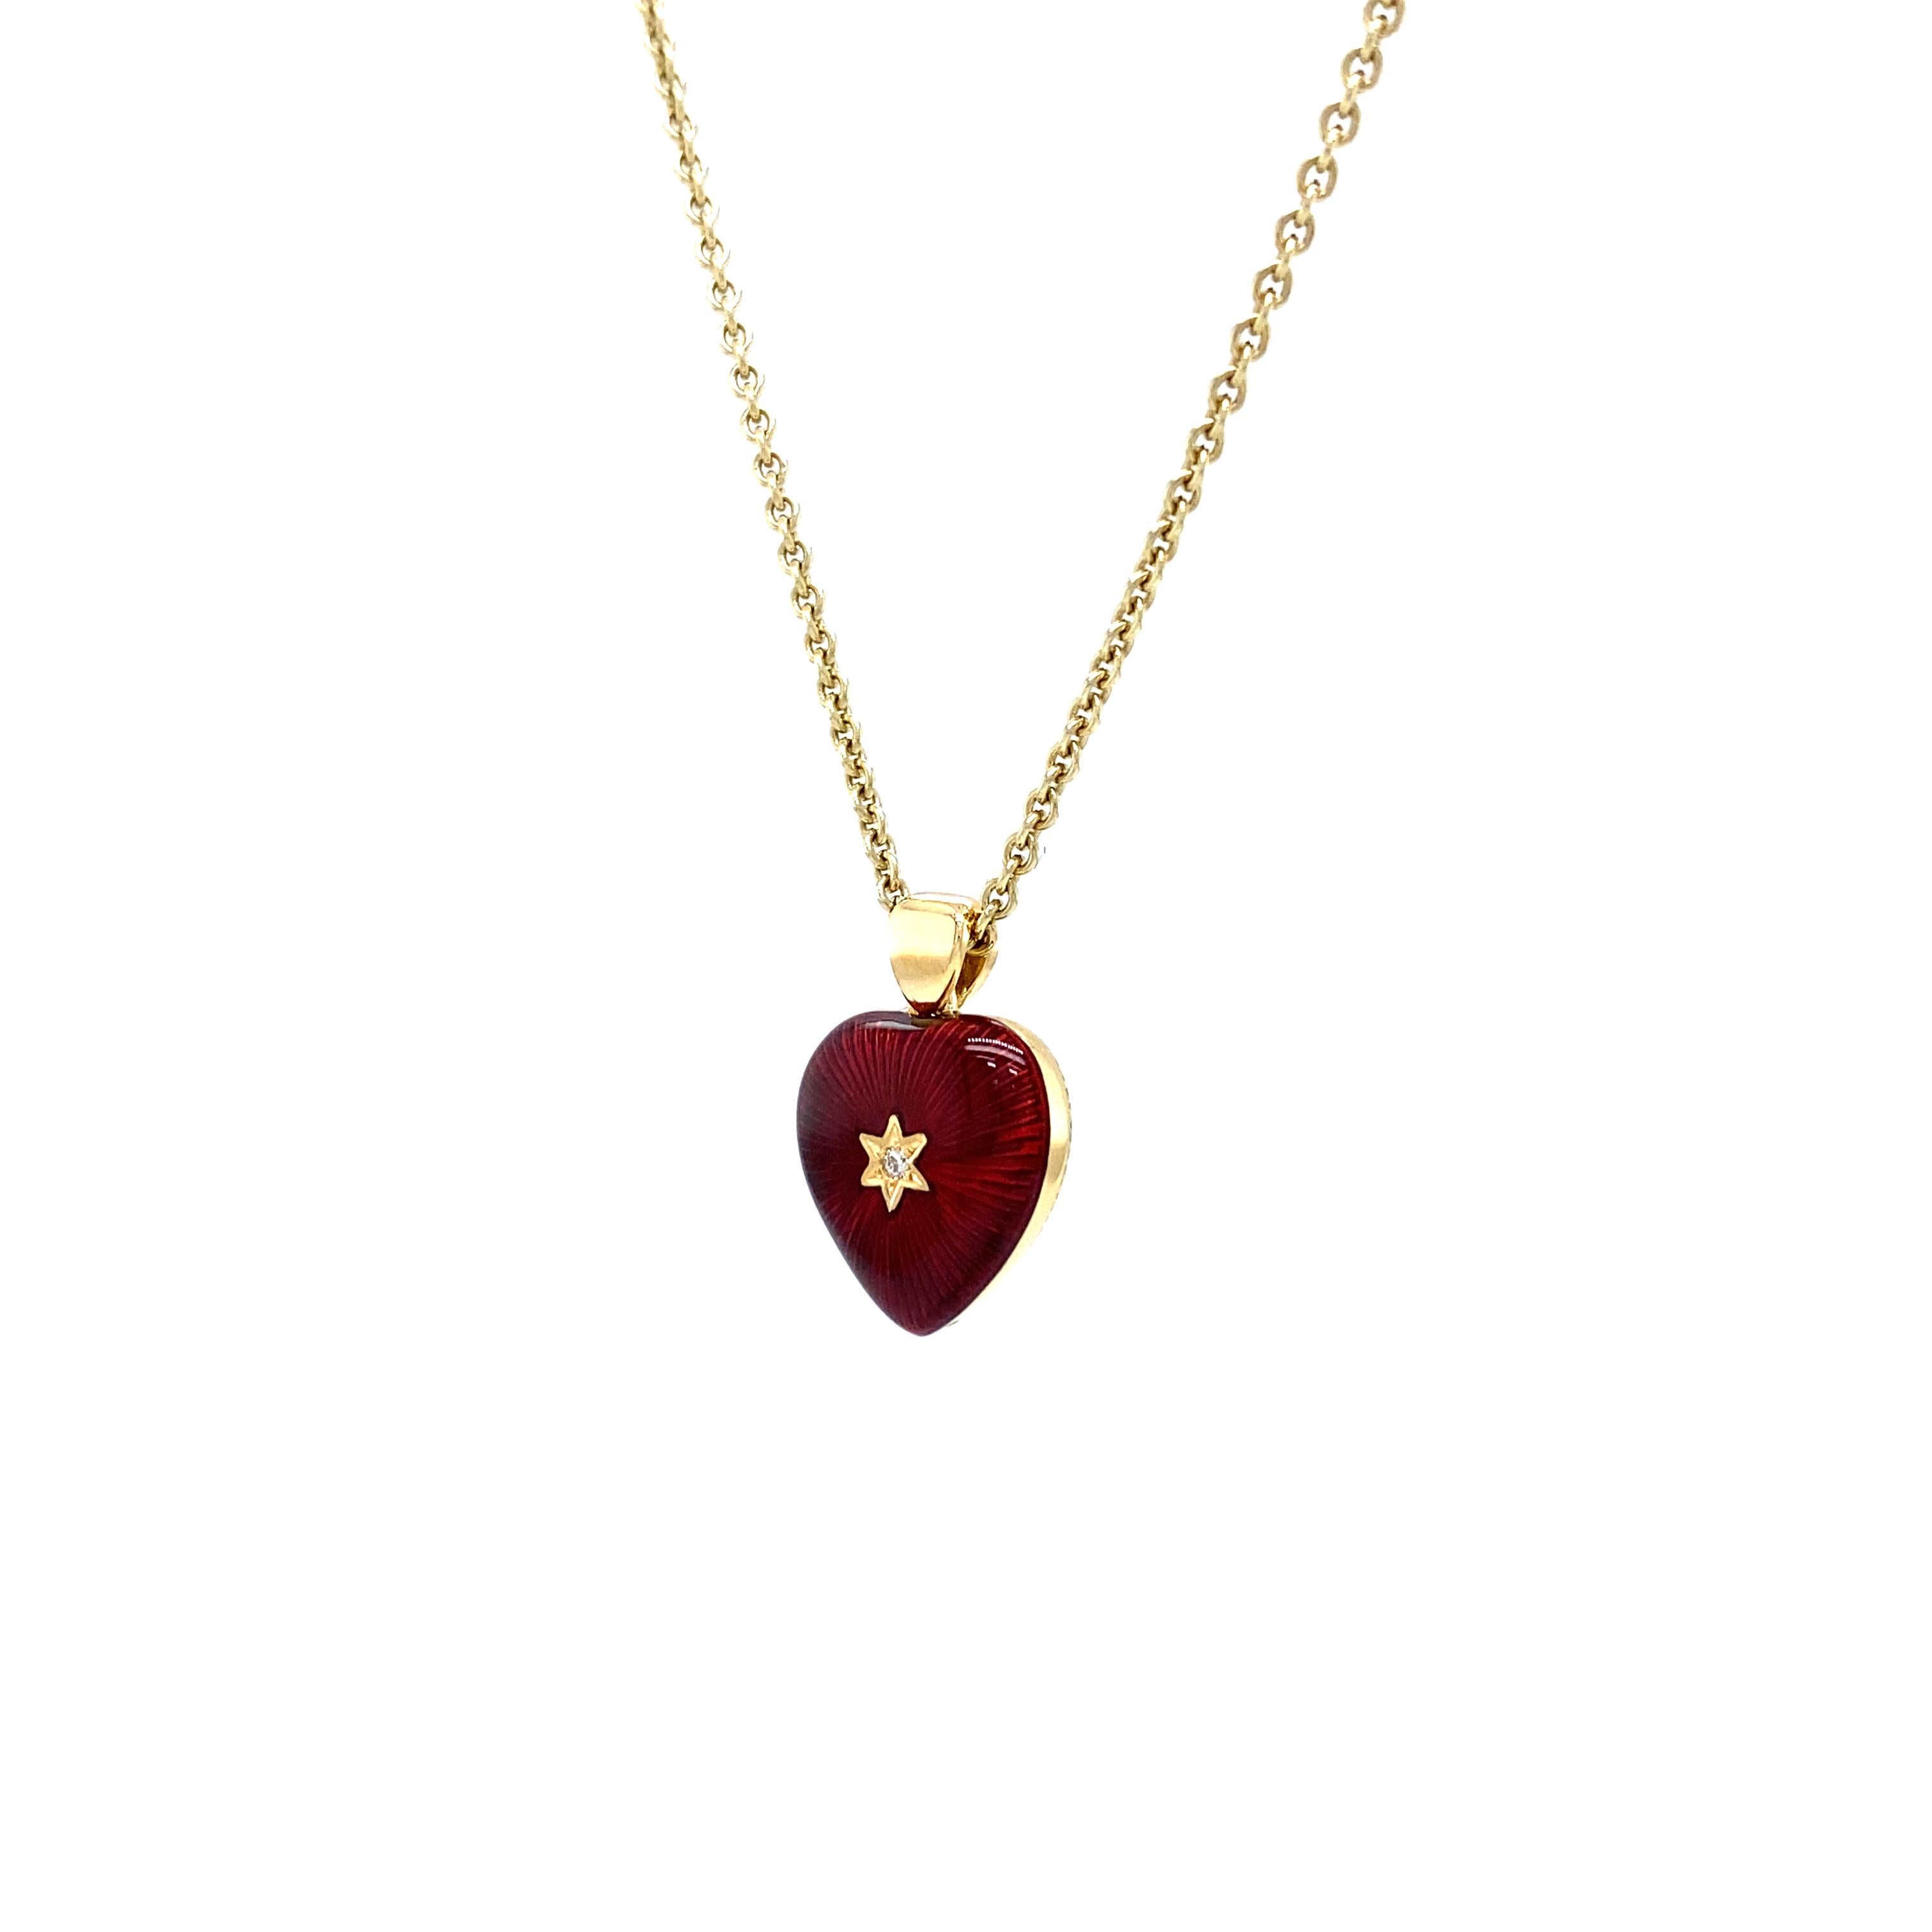 Heart Pendant Necklace 18k Yellow Gold Red and Green Enamel 2 Diamonds 2.02ct For Sale 1